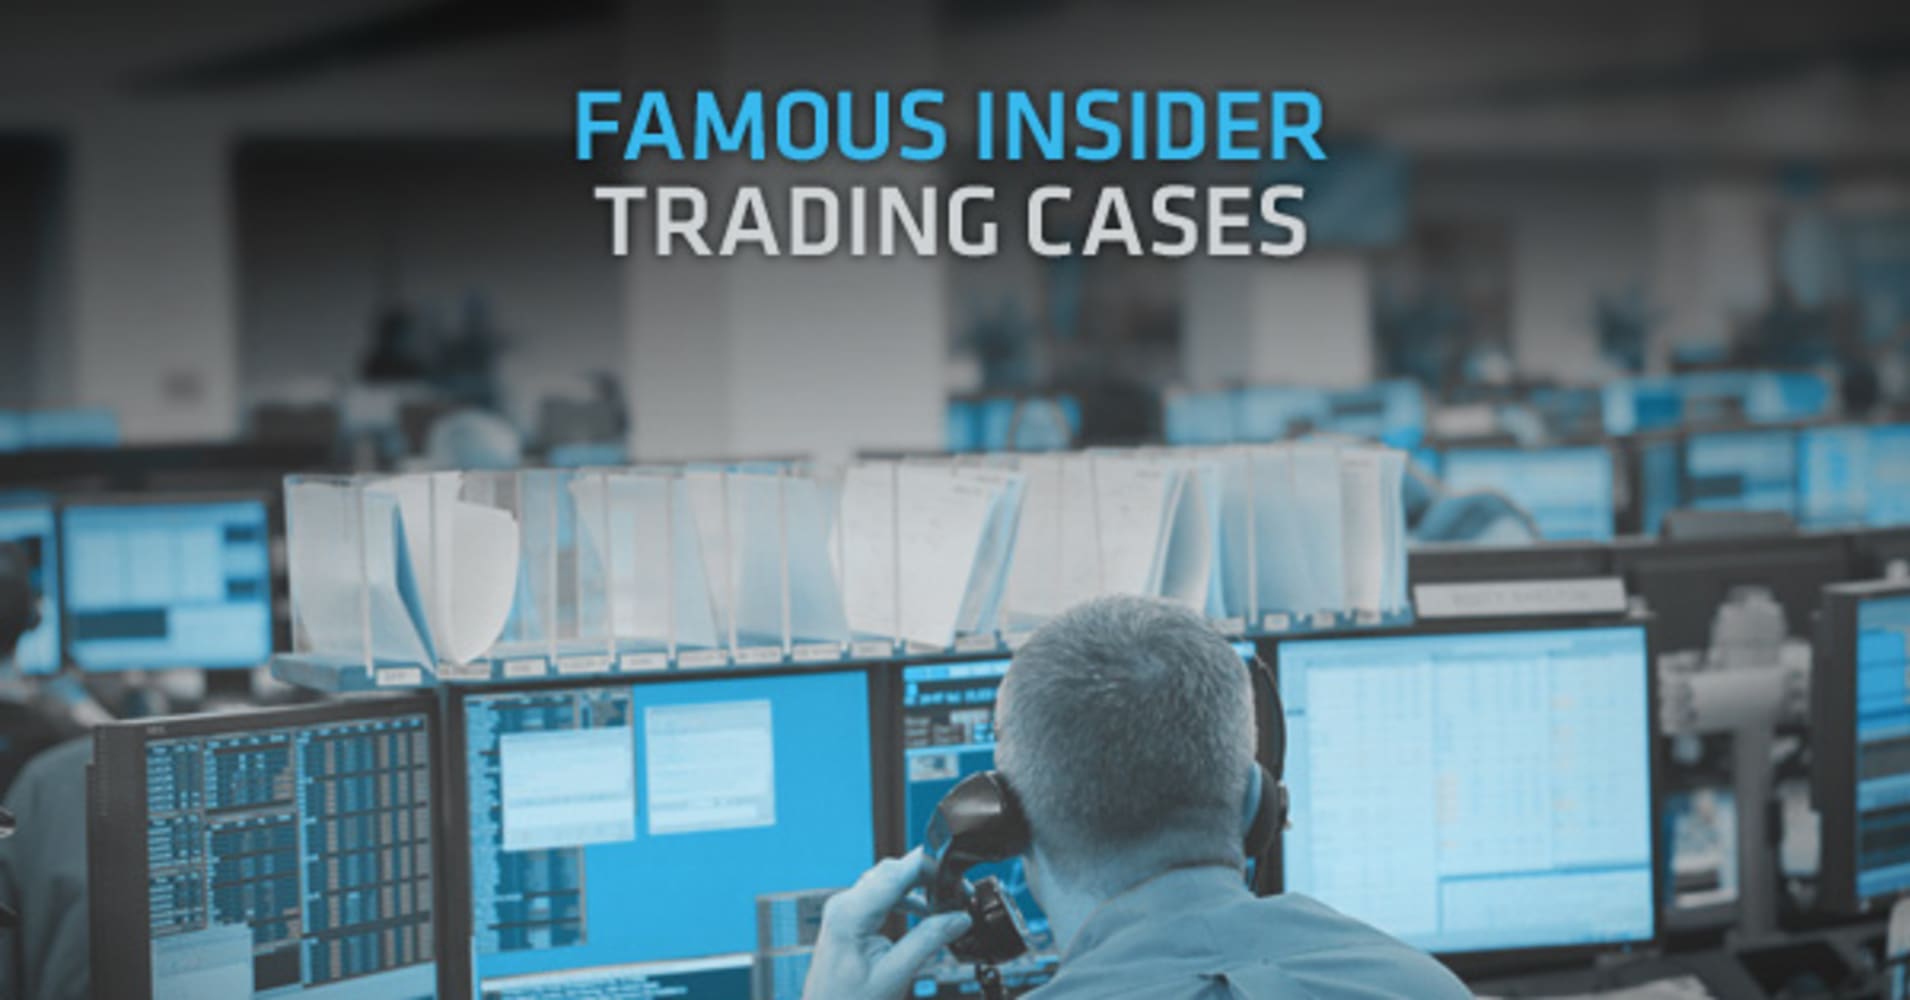 Famous insider trading cases